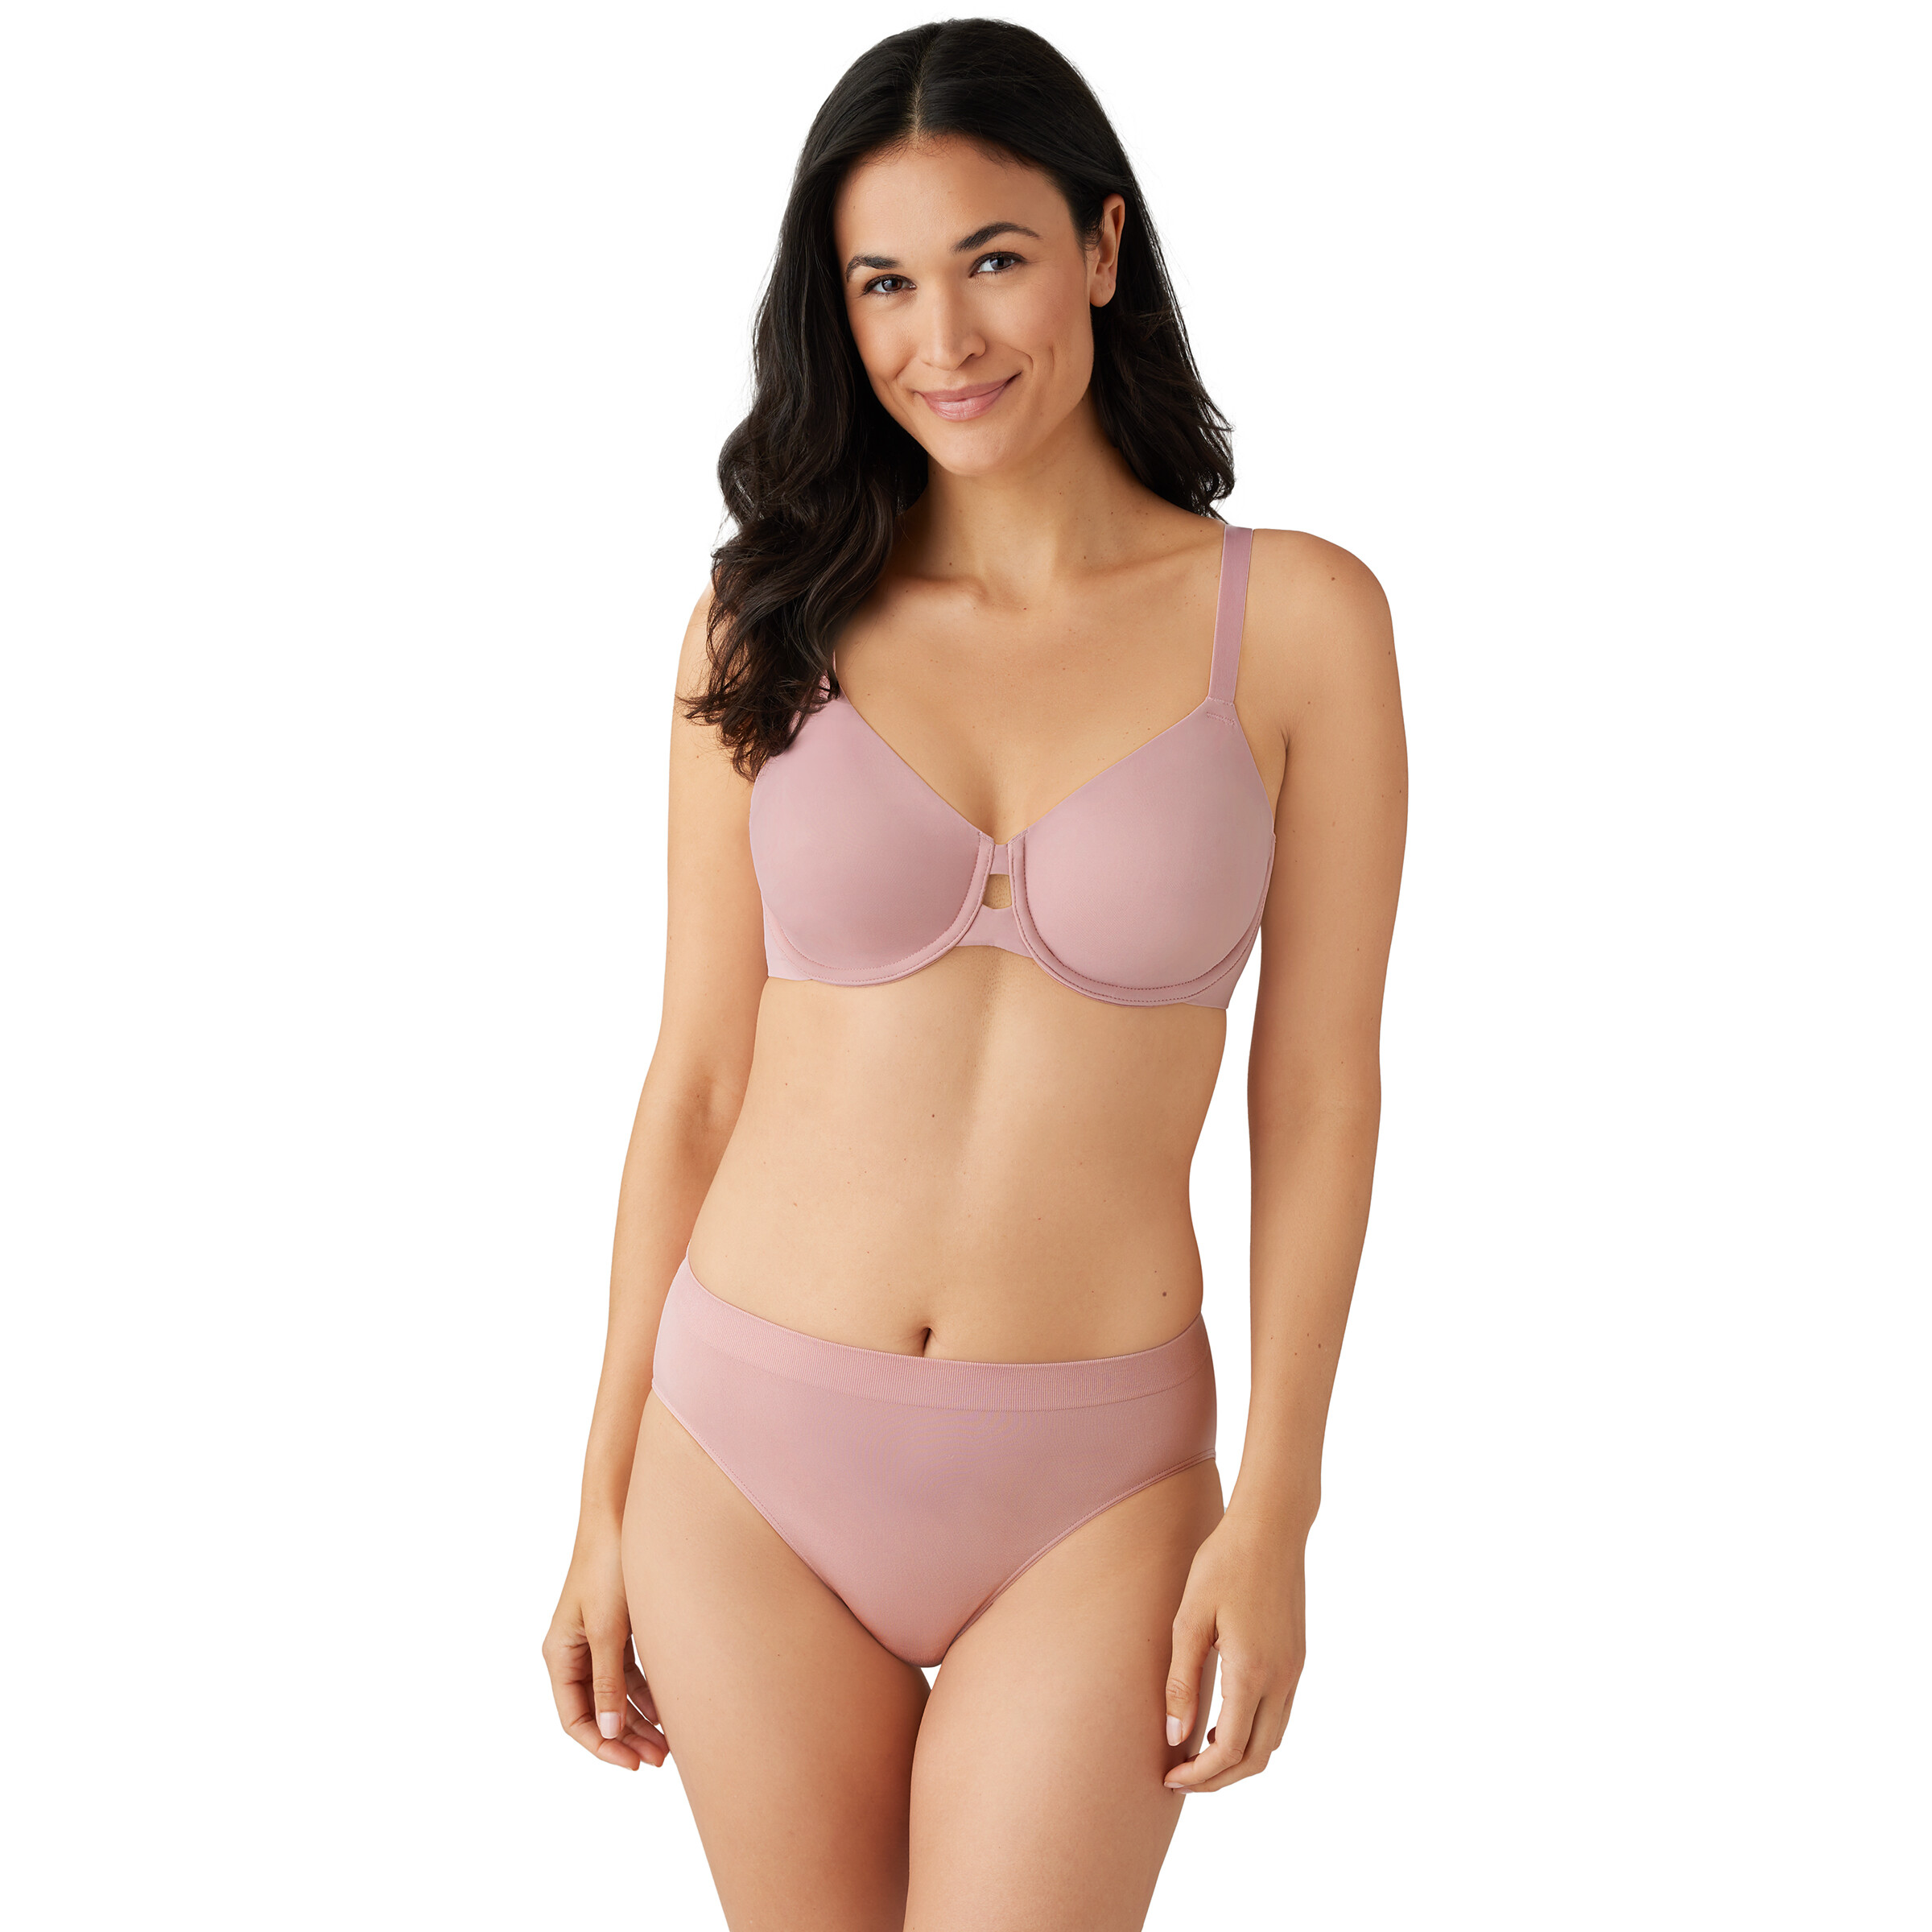 Imbracaminte Femei Wacoal Superbly Smooth Underwire 855342 Zephyr Pink